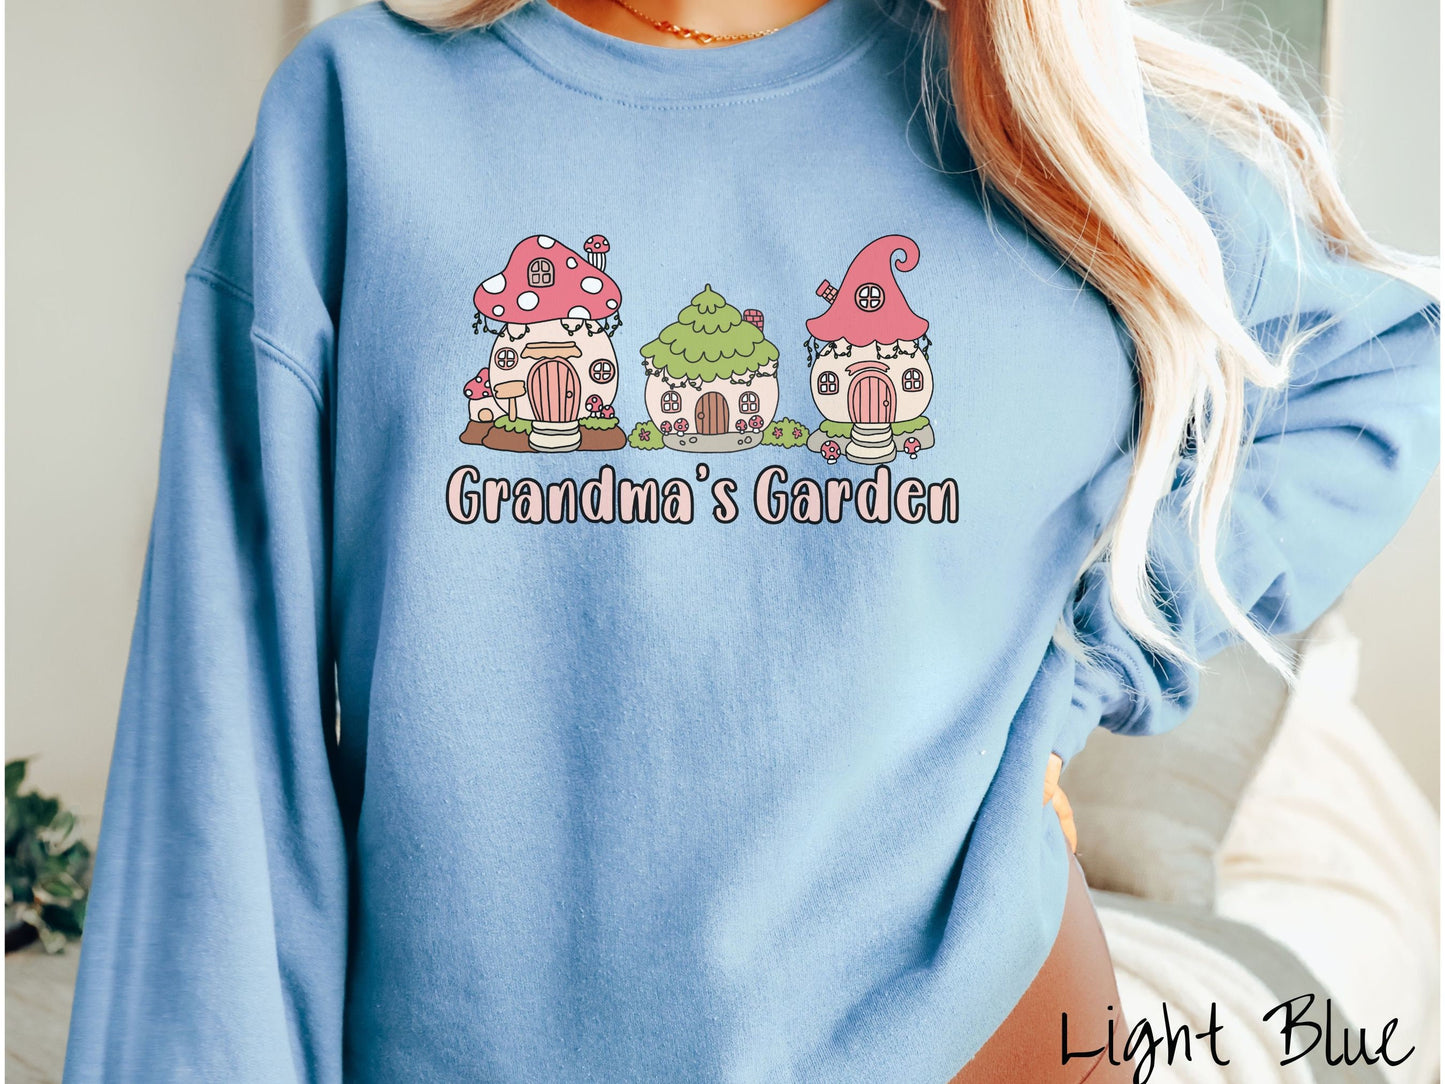 A woman wearing a cute, vintage light blue colored comfy sweatshirt with the text Grandmas Garden in light pink font. Above the text are cute little cottages for gnomes made from light and dark pink mushrooms.